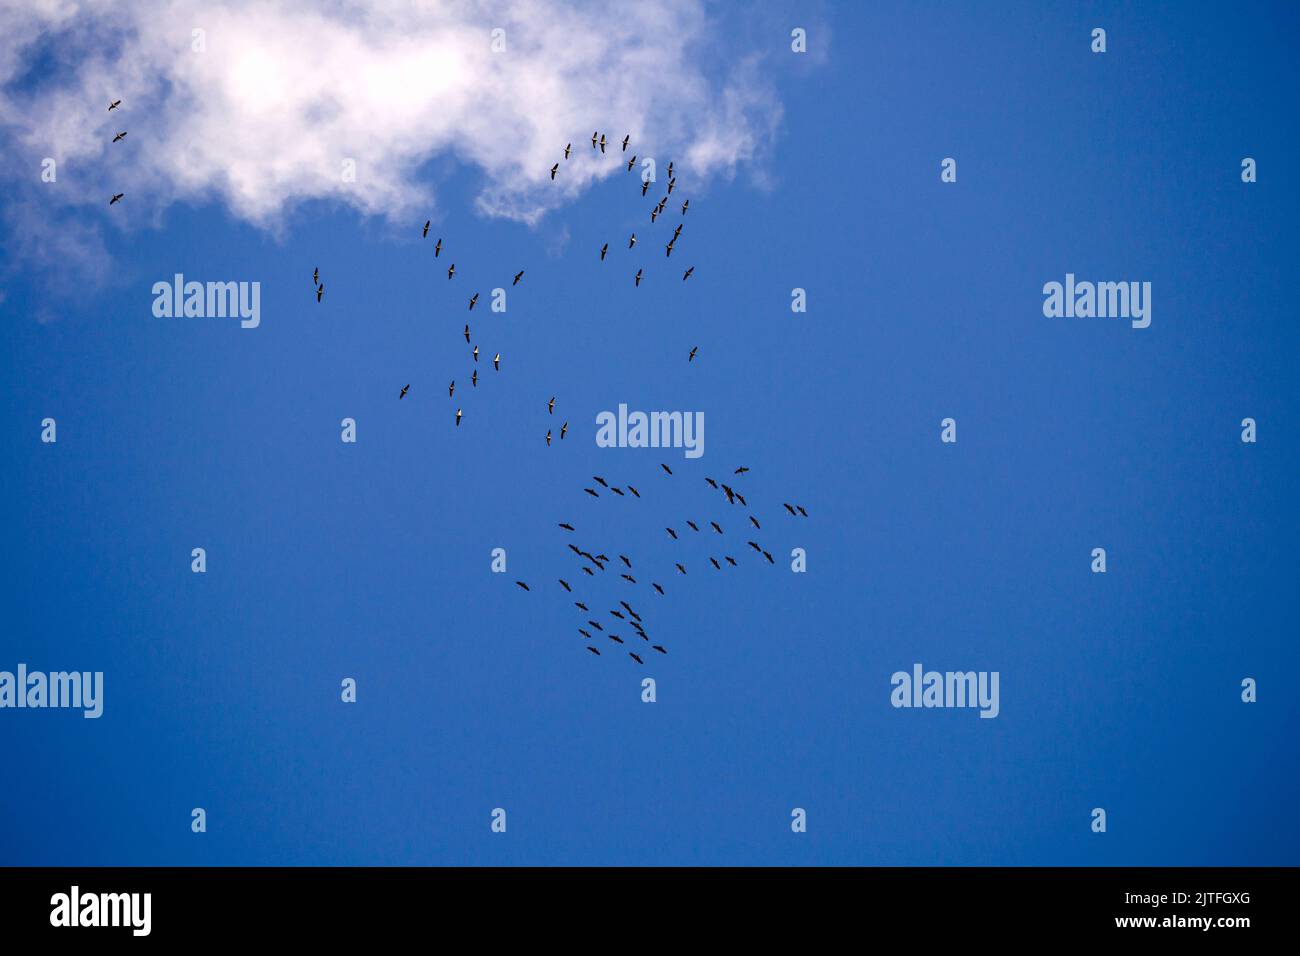 Flocks of cranes in the sky, gathered in flight. Stock Photo